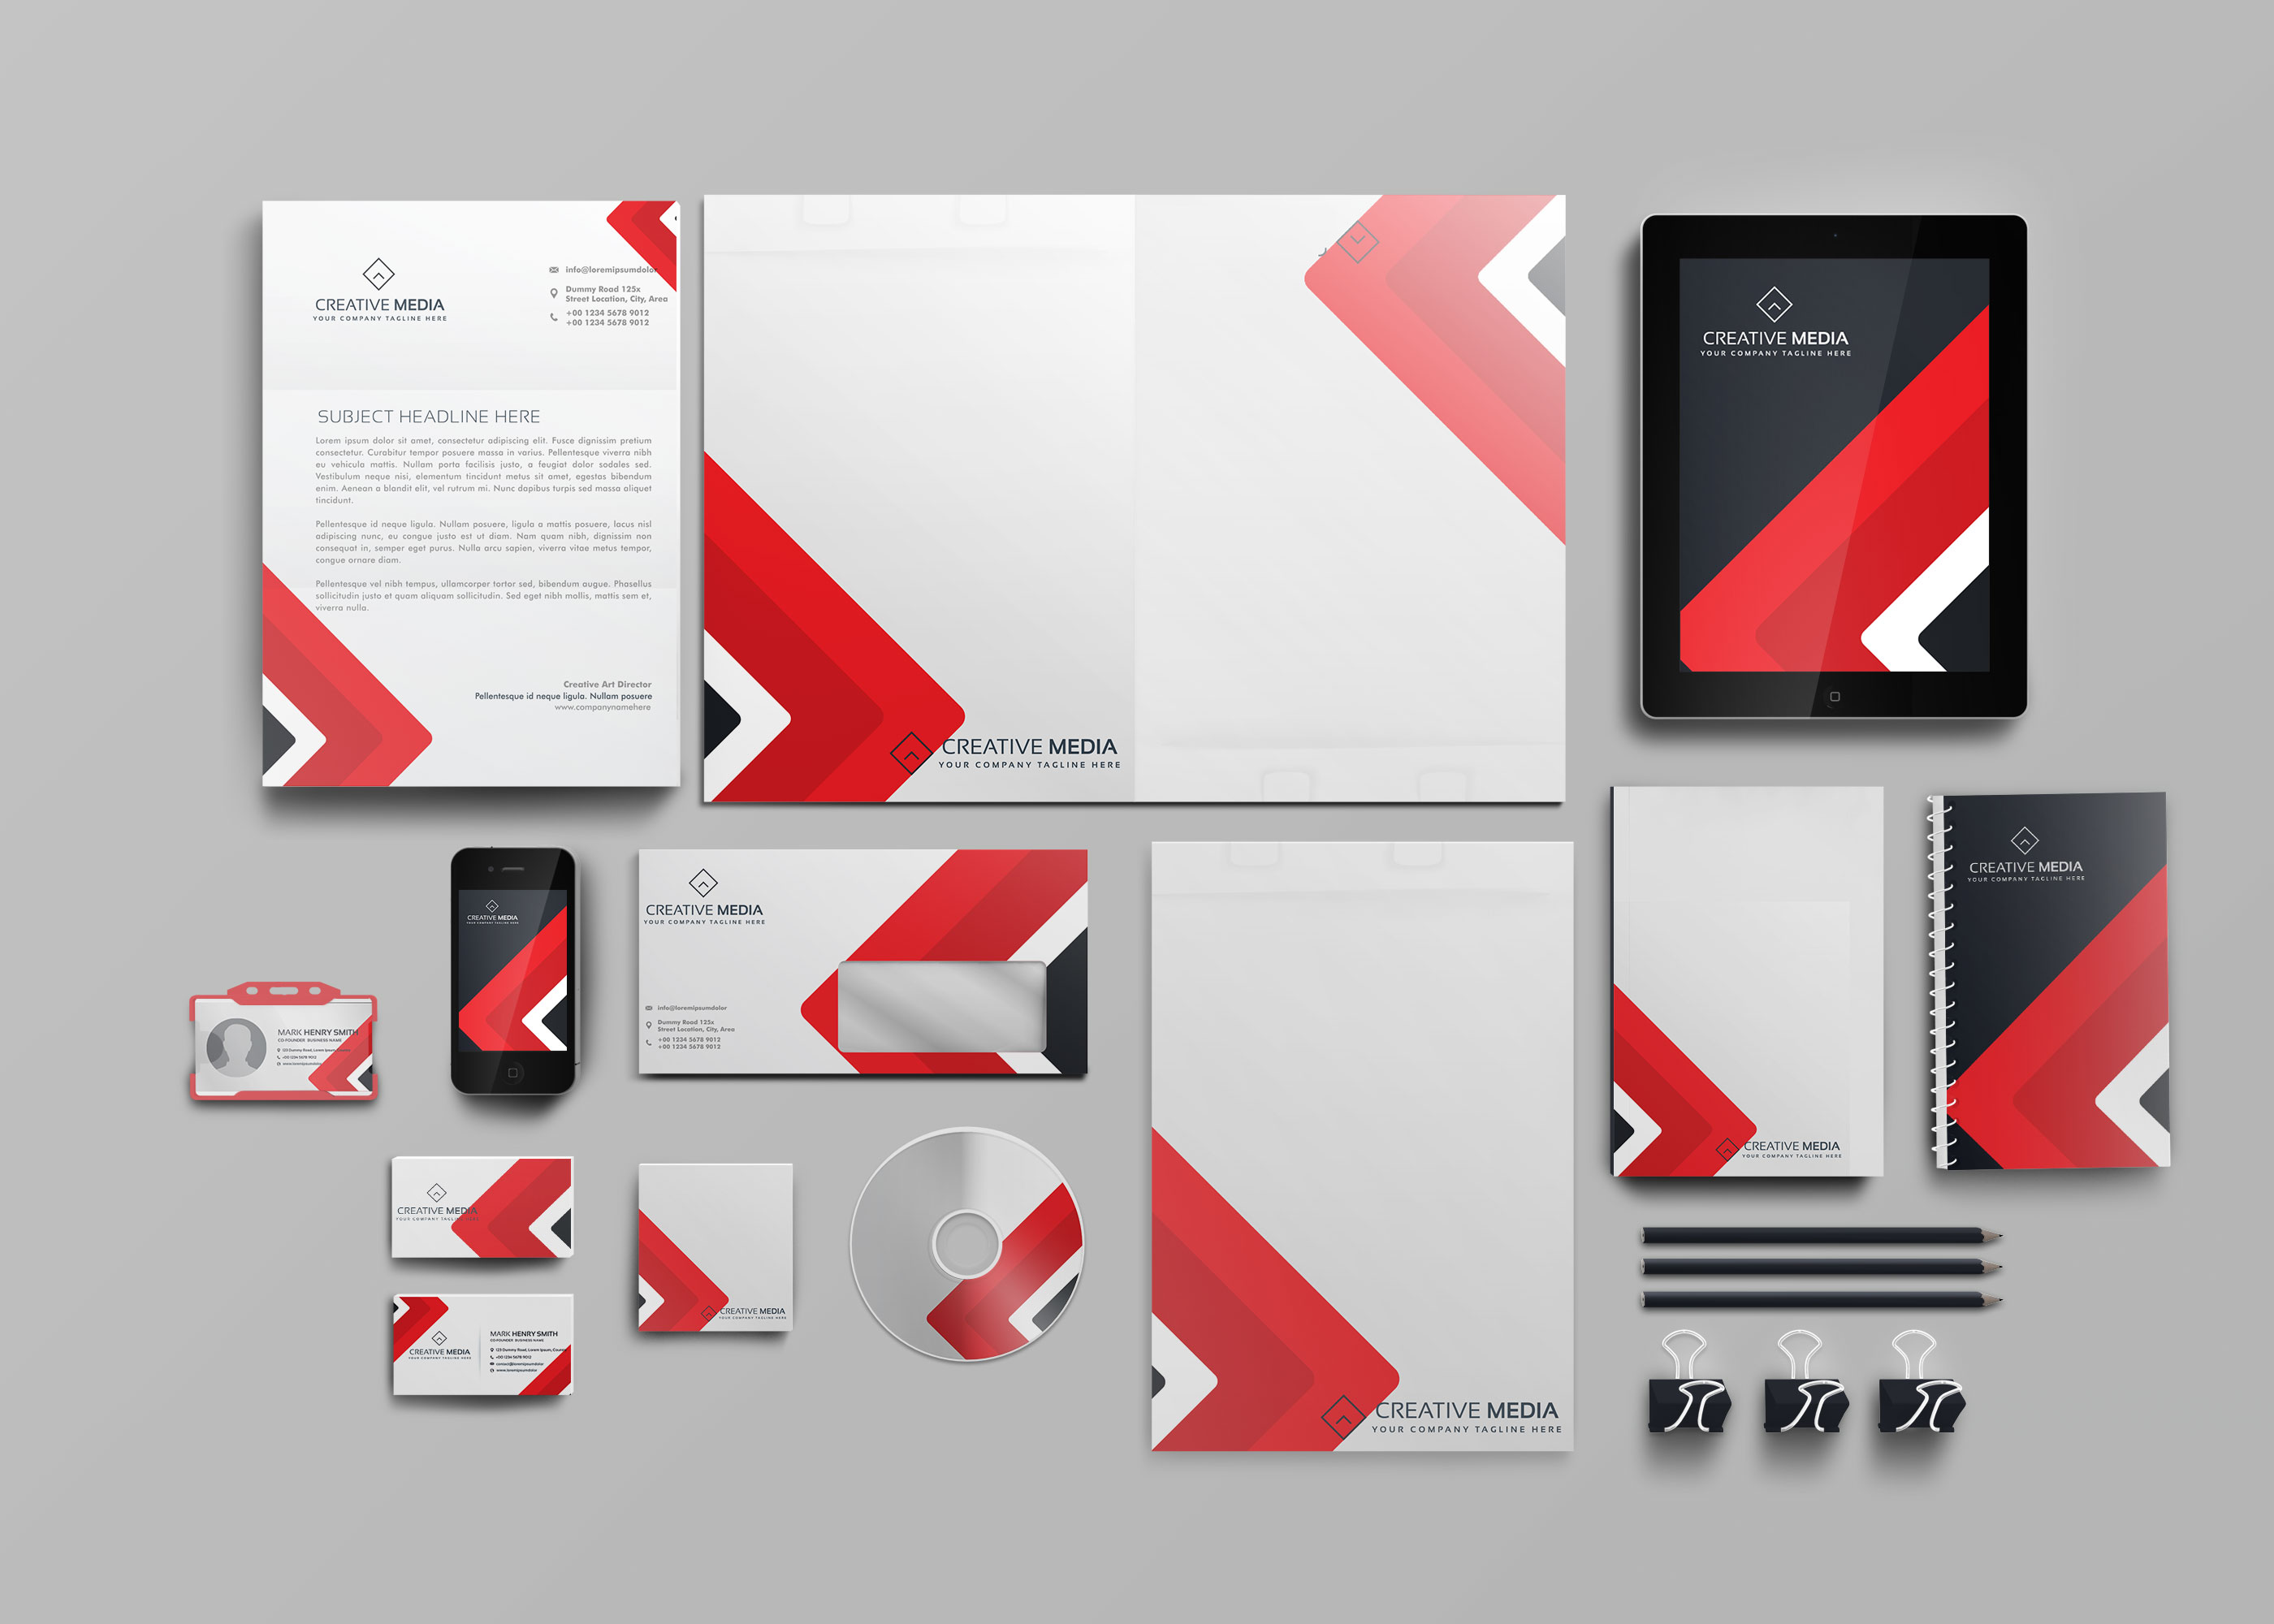 Download Free Corporate Identity Psd Mockup Free Psd Mockup New Mockup PSD Mockup Templates